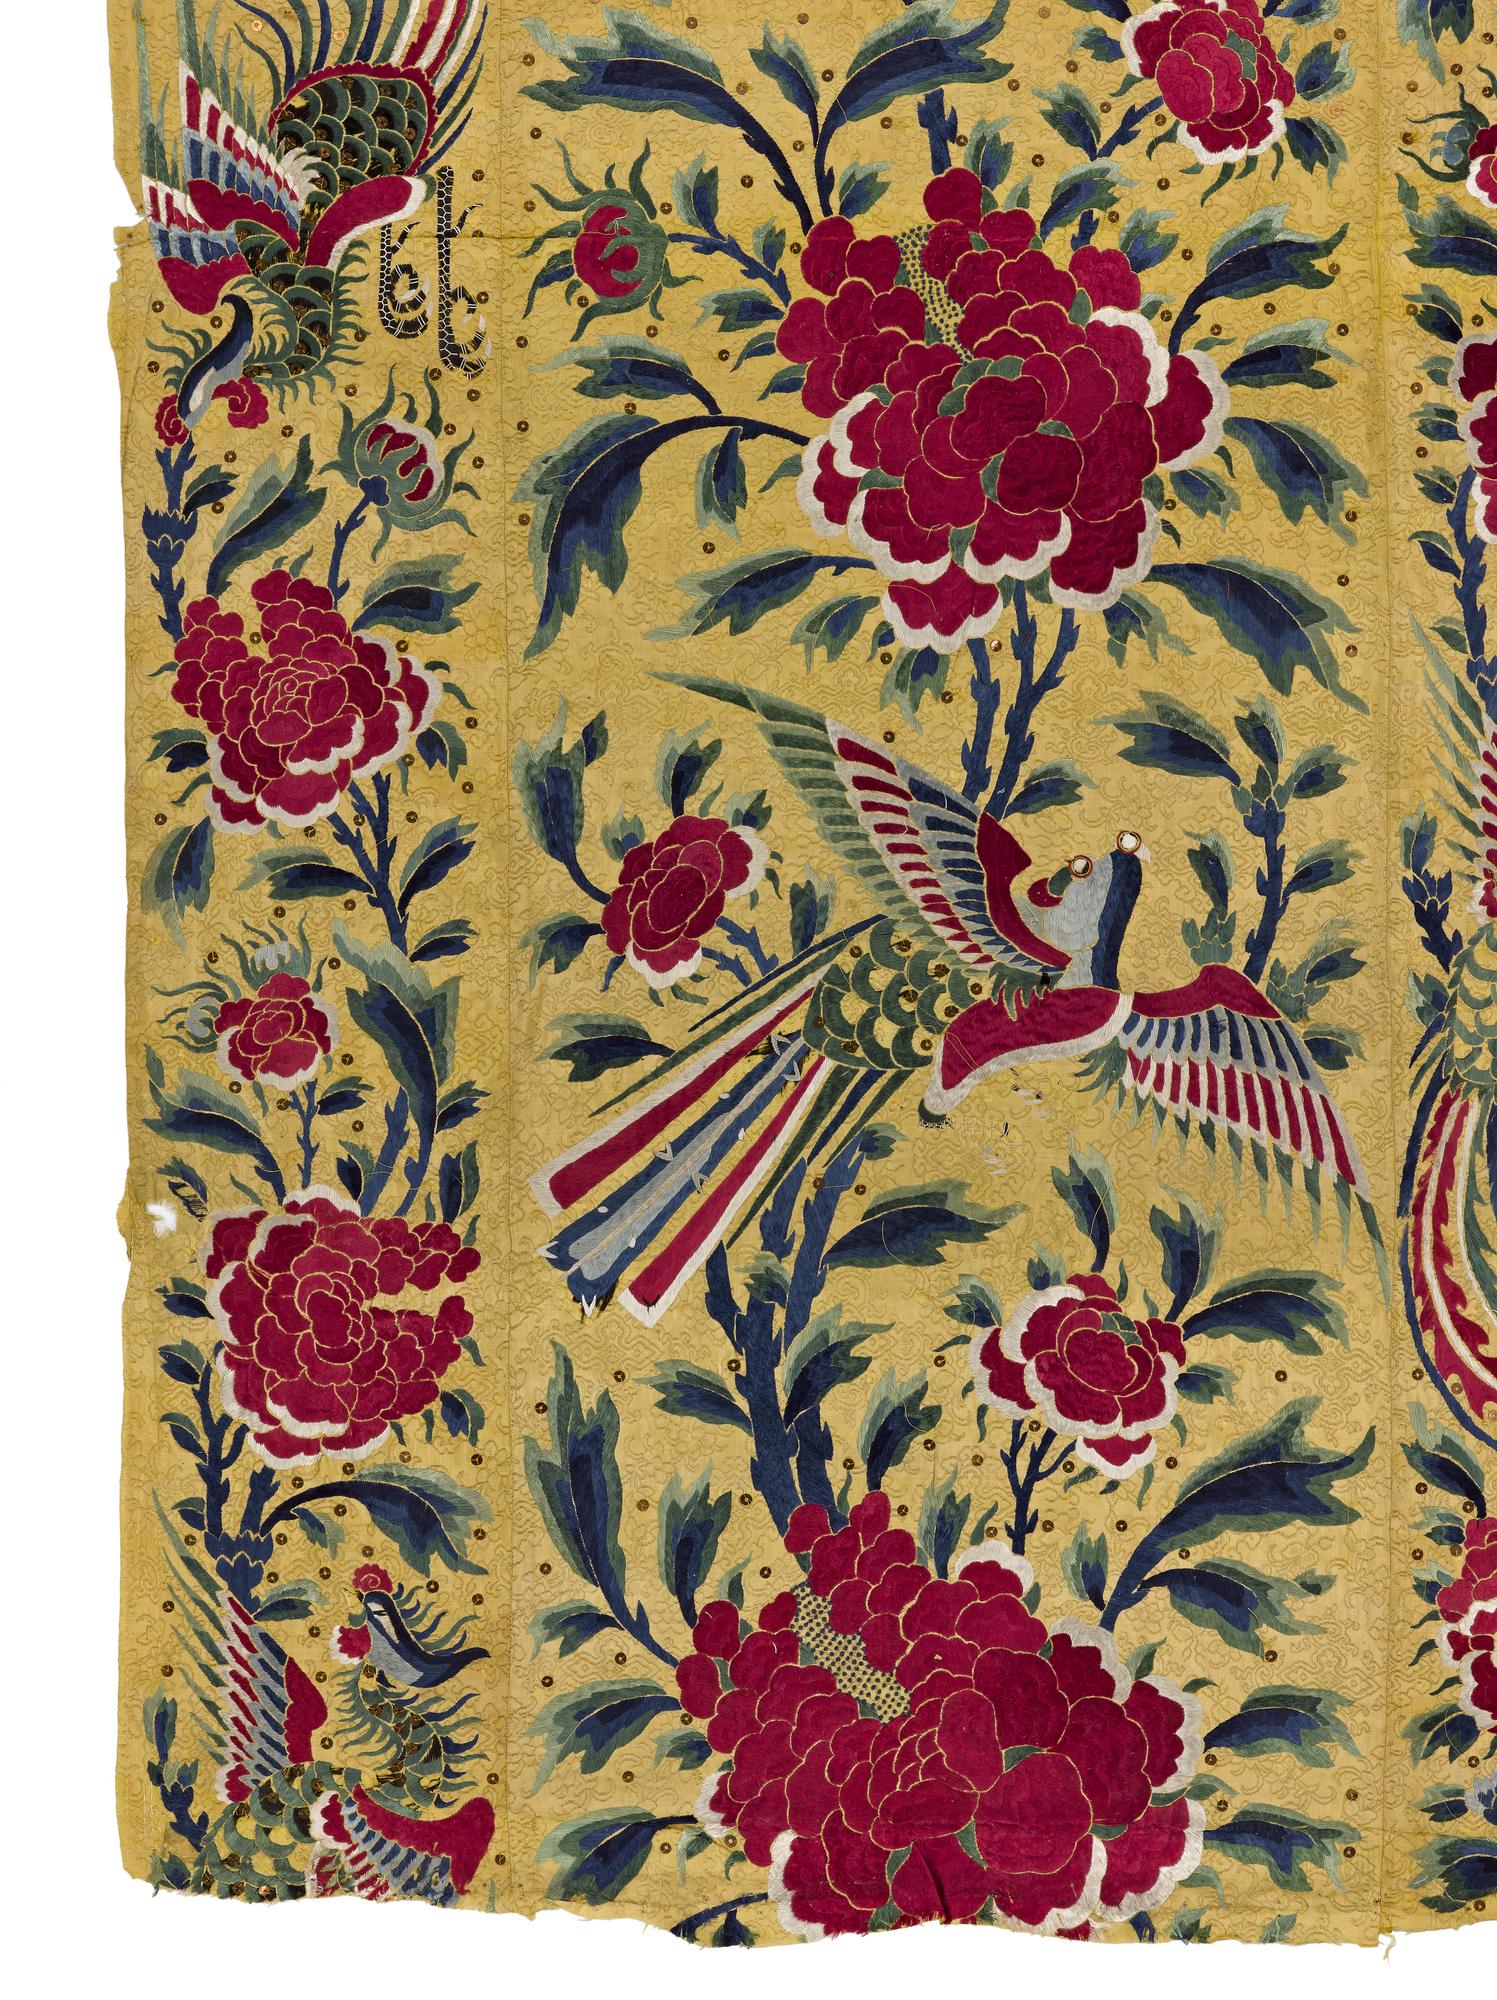 Hanging consisting of four pieces of yellow silk brocade sewn together, studded with sequins, embroidered with coloured silks and showing a design of birds, flowers and lions: China, 19th century.